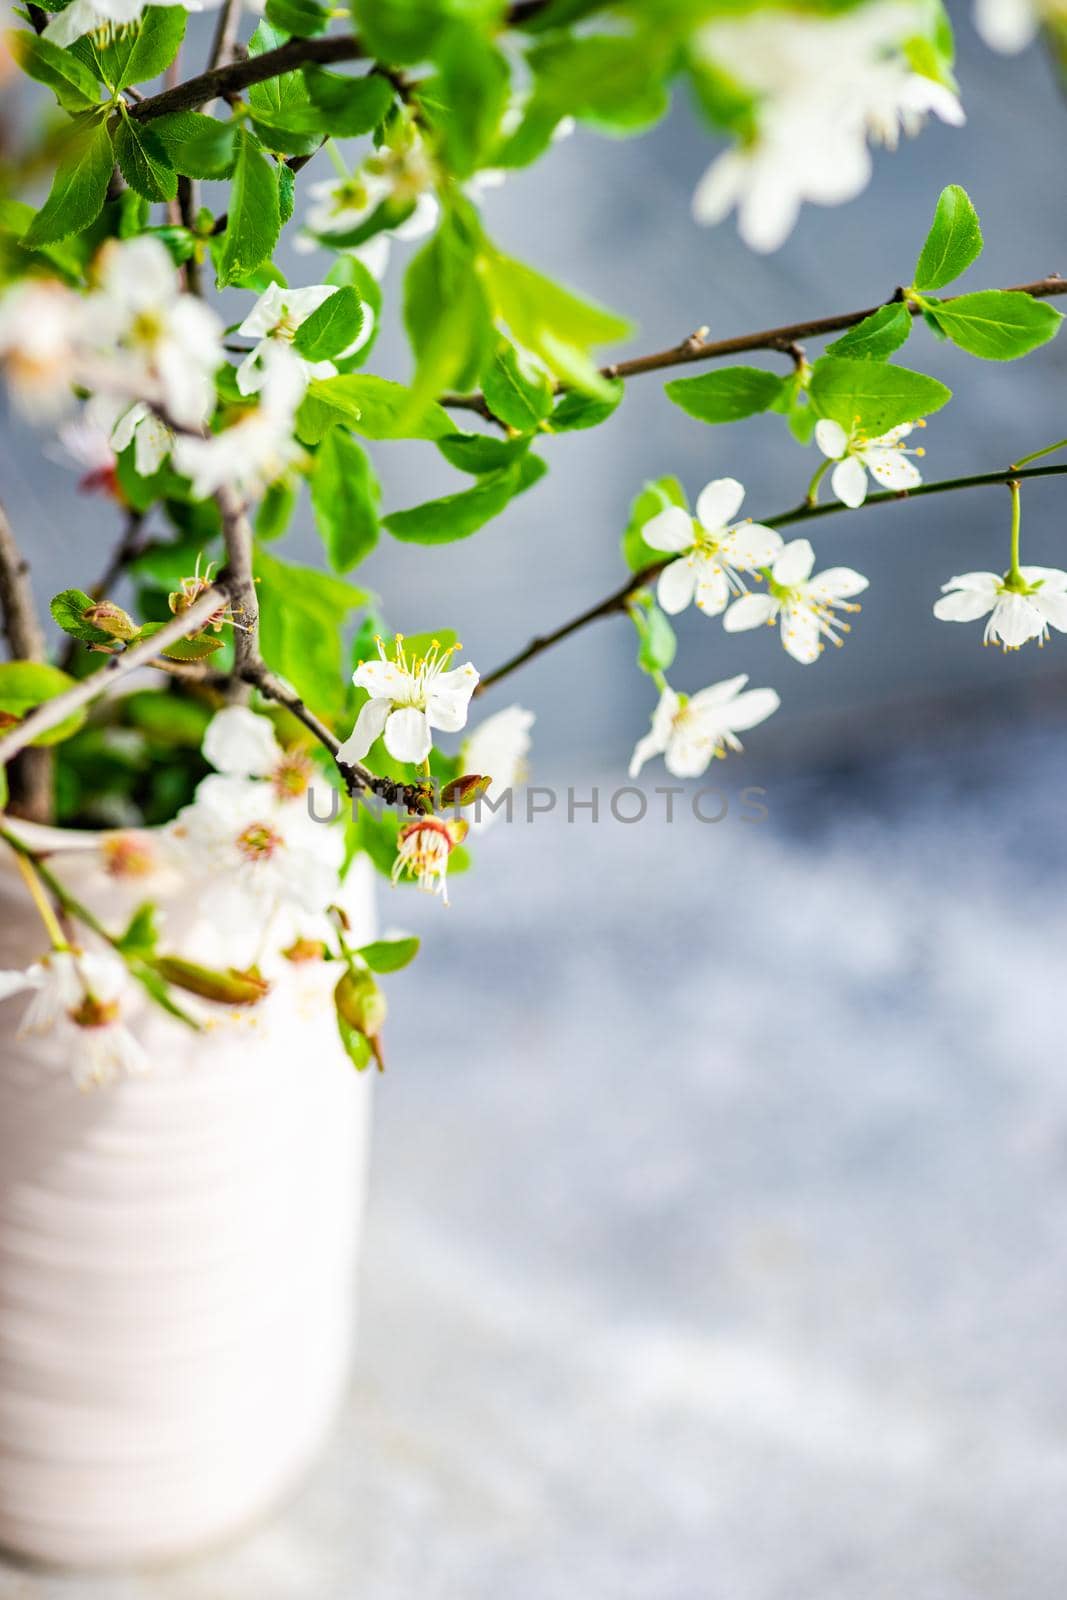 Blooming cherry tree branches in the vase by Elet